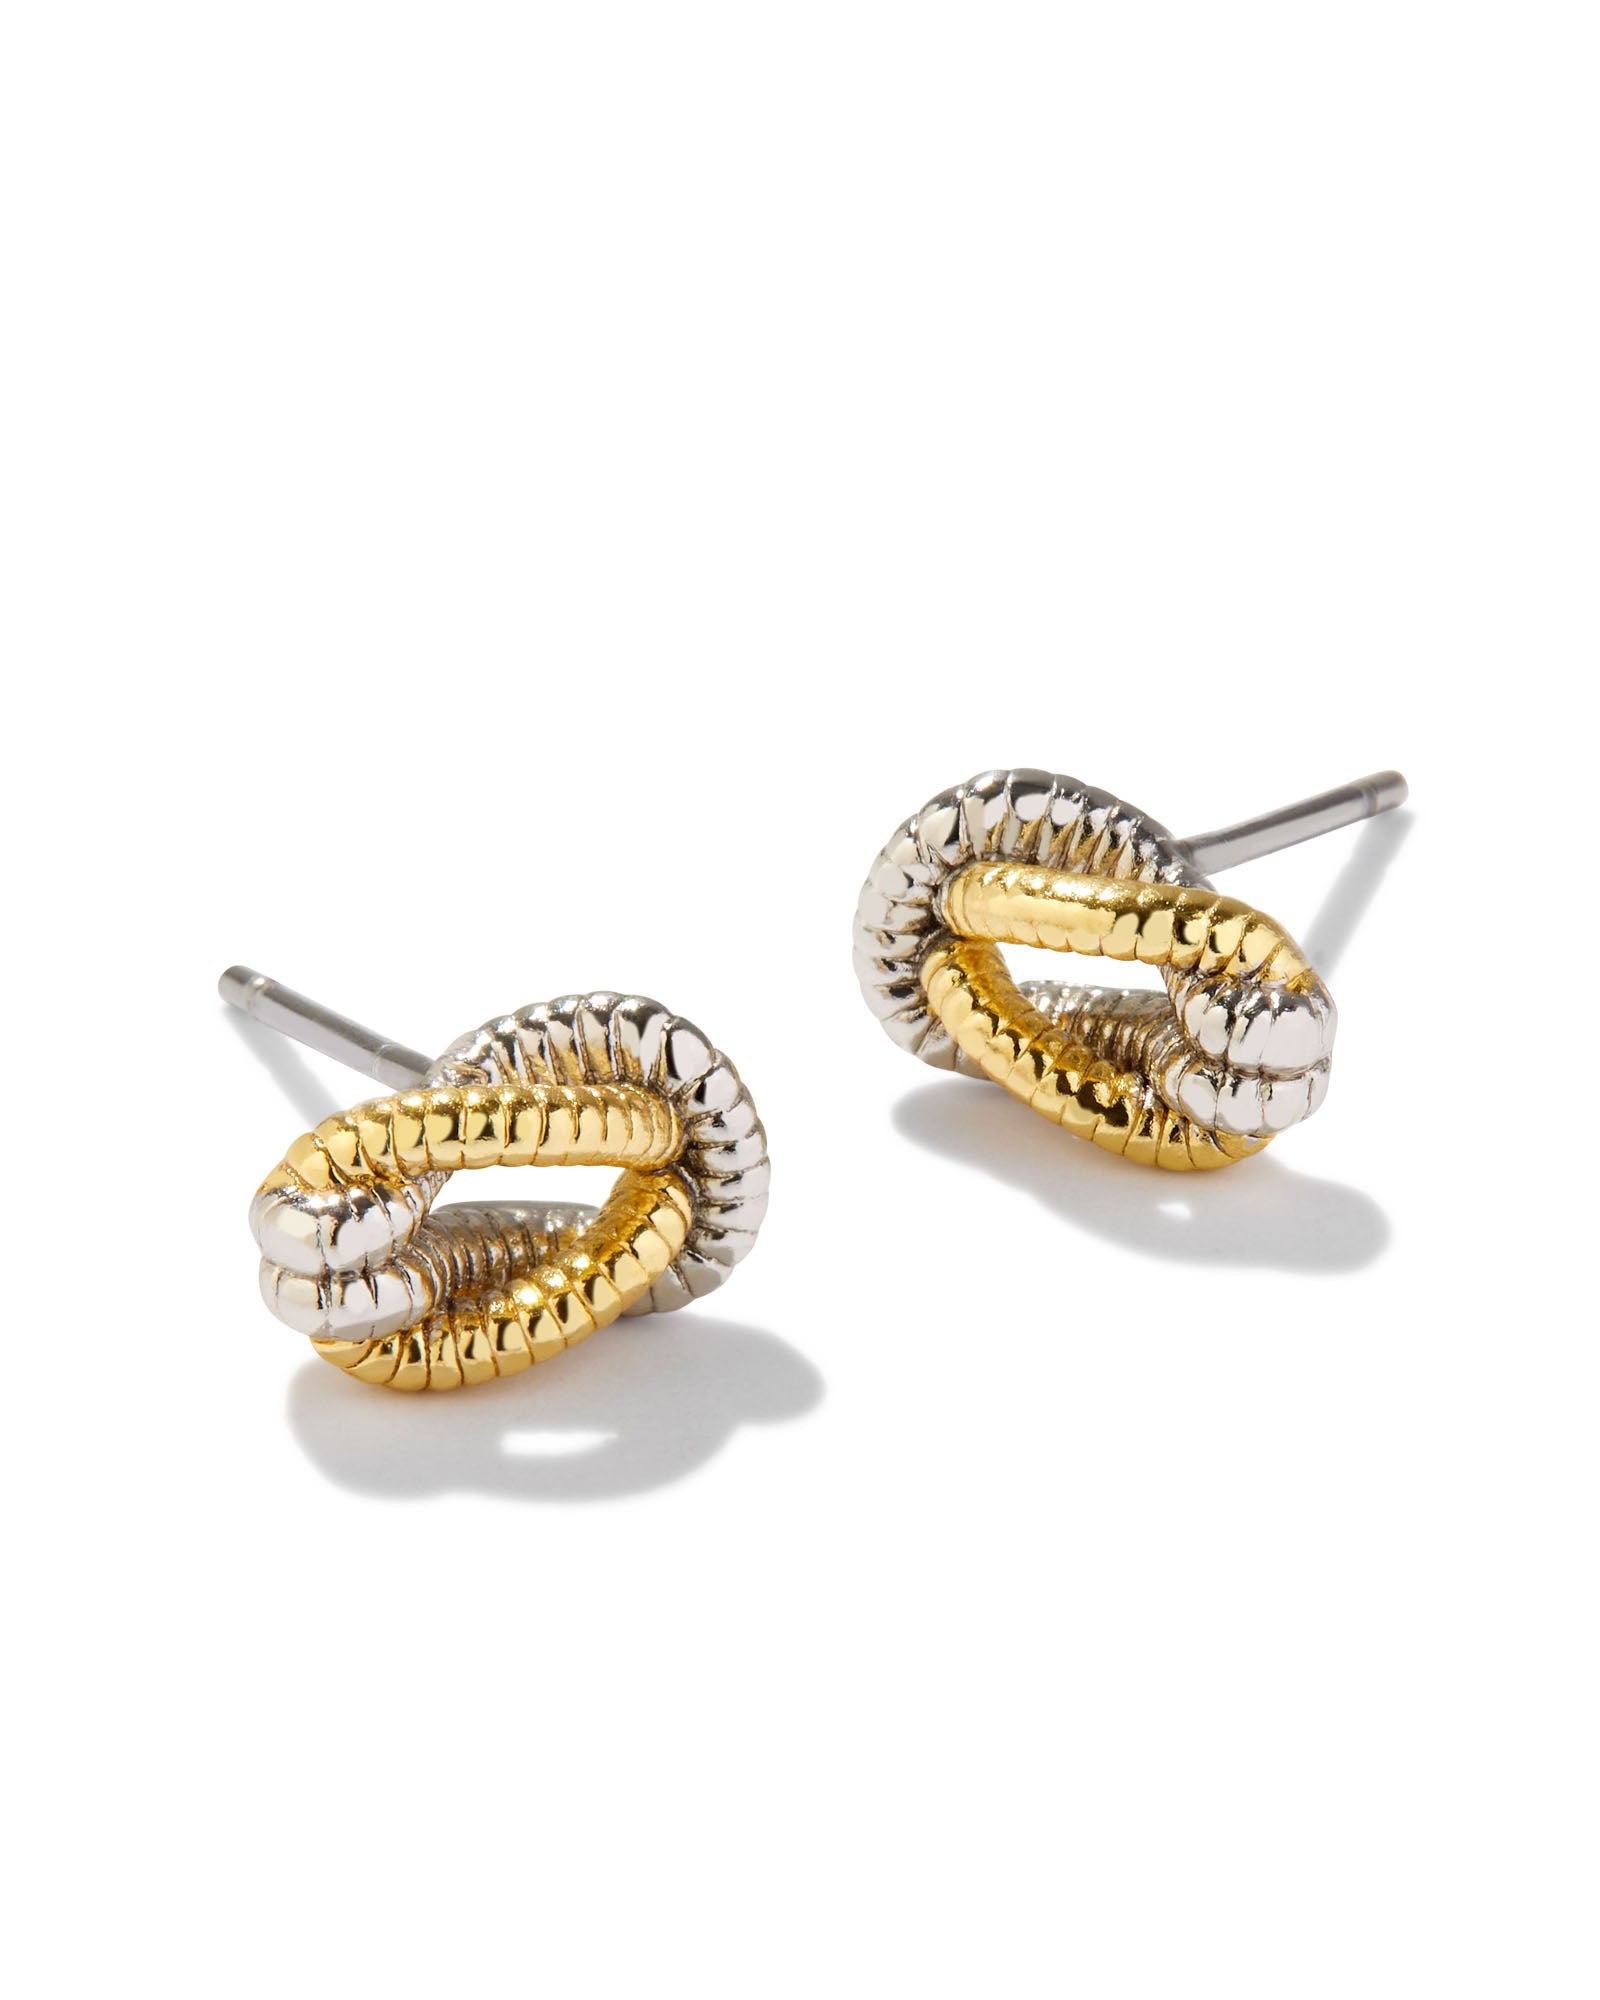 Kendra Scott Annie Knot Stud Earrings in Gold and Rhodium Mixed Metal Plated